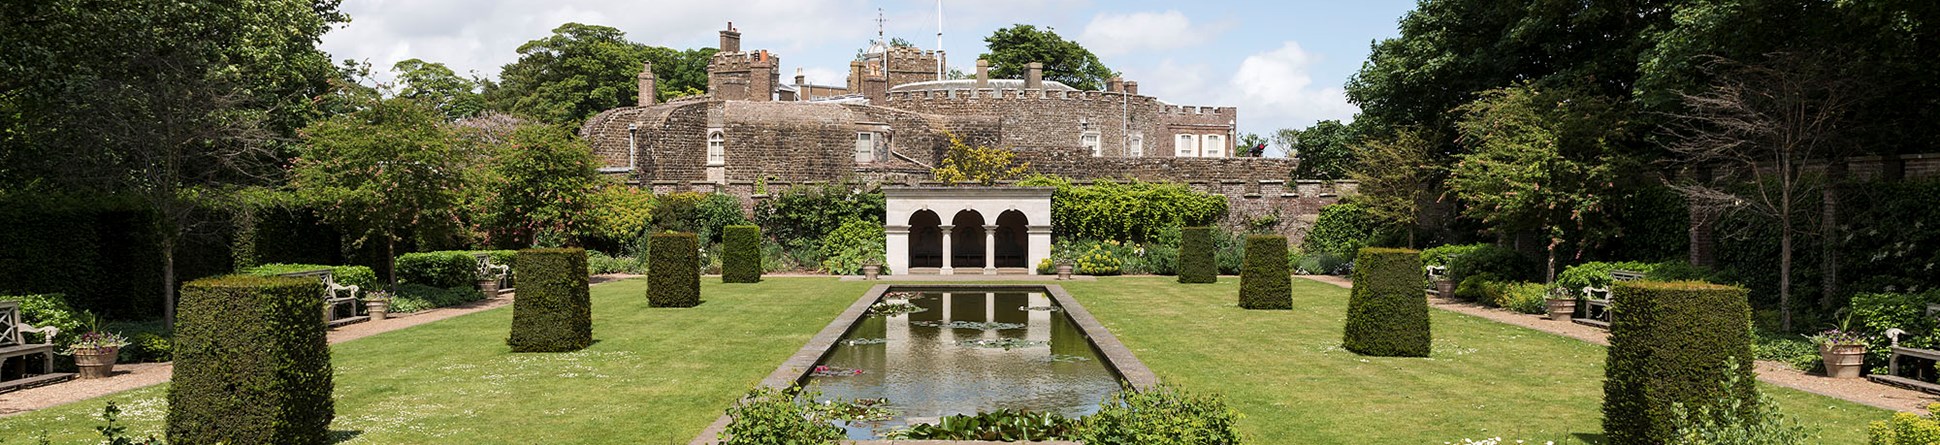 Walmer Castle, Walmer, Deal, Kent.
The Queen Mother's Garden, view from the south.